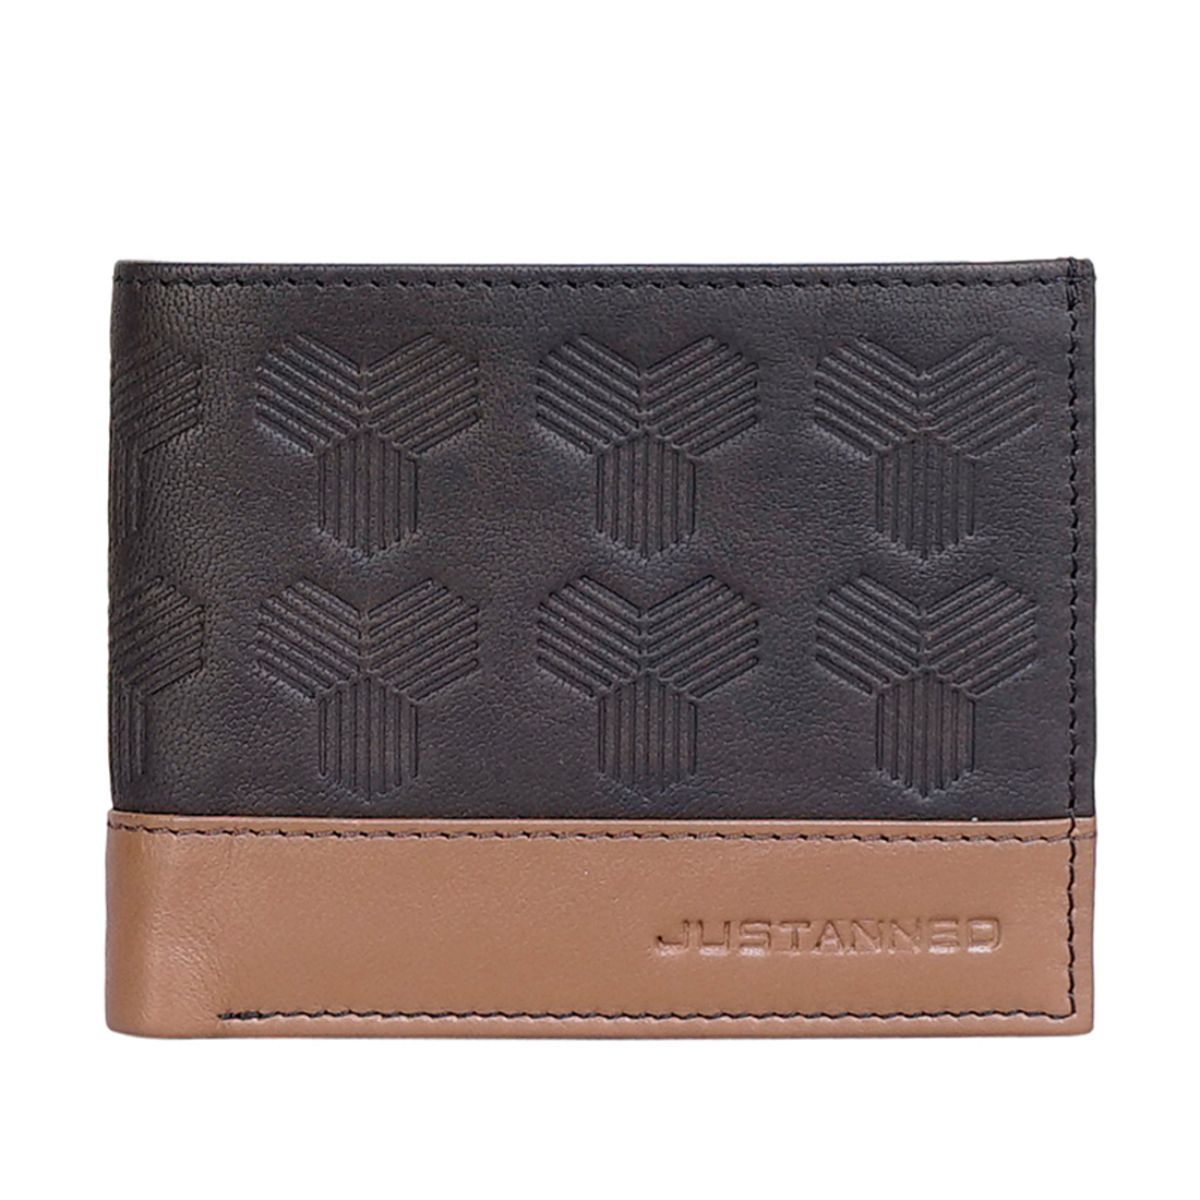 Justanned Men'S Leather Embossed Bi-Fold Wallet (Olive) At Nykaa, Best Beauty Products Online